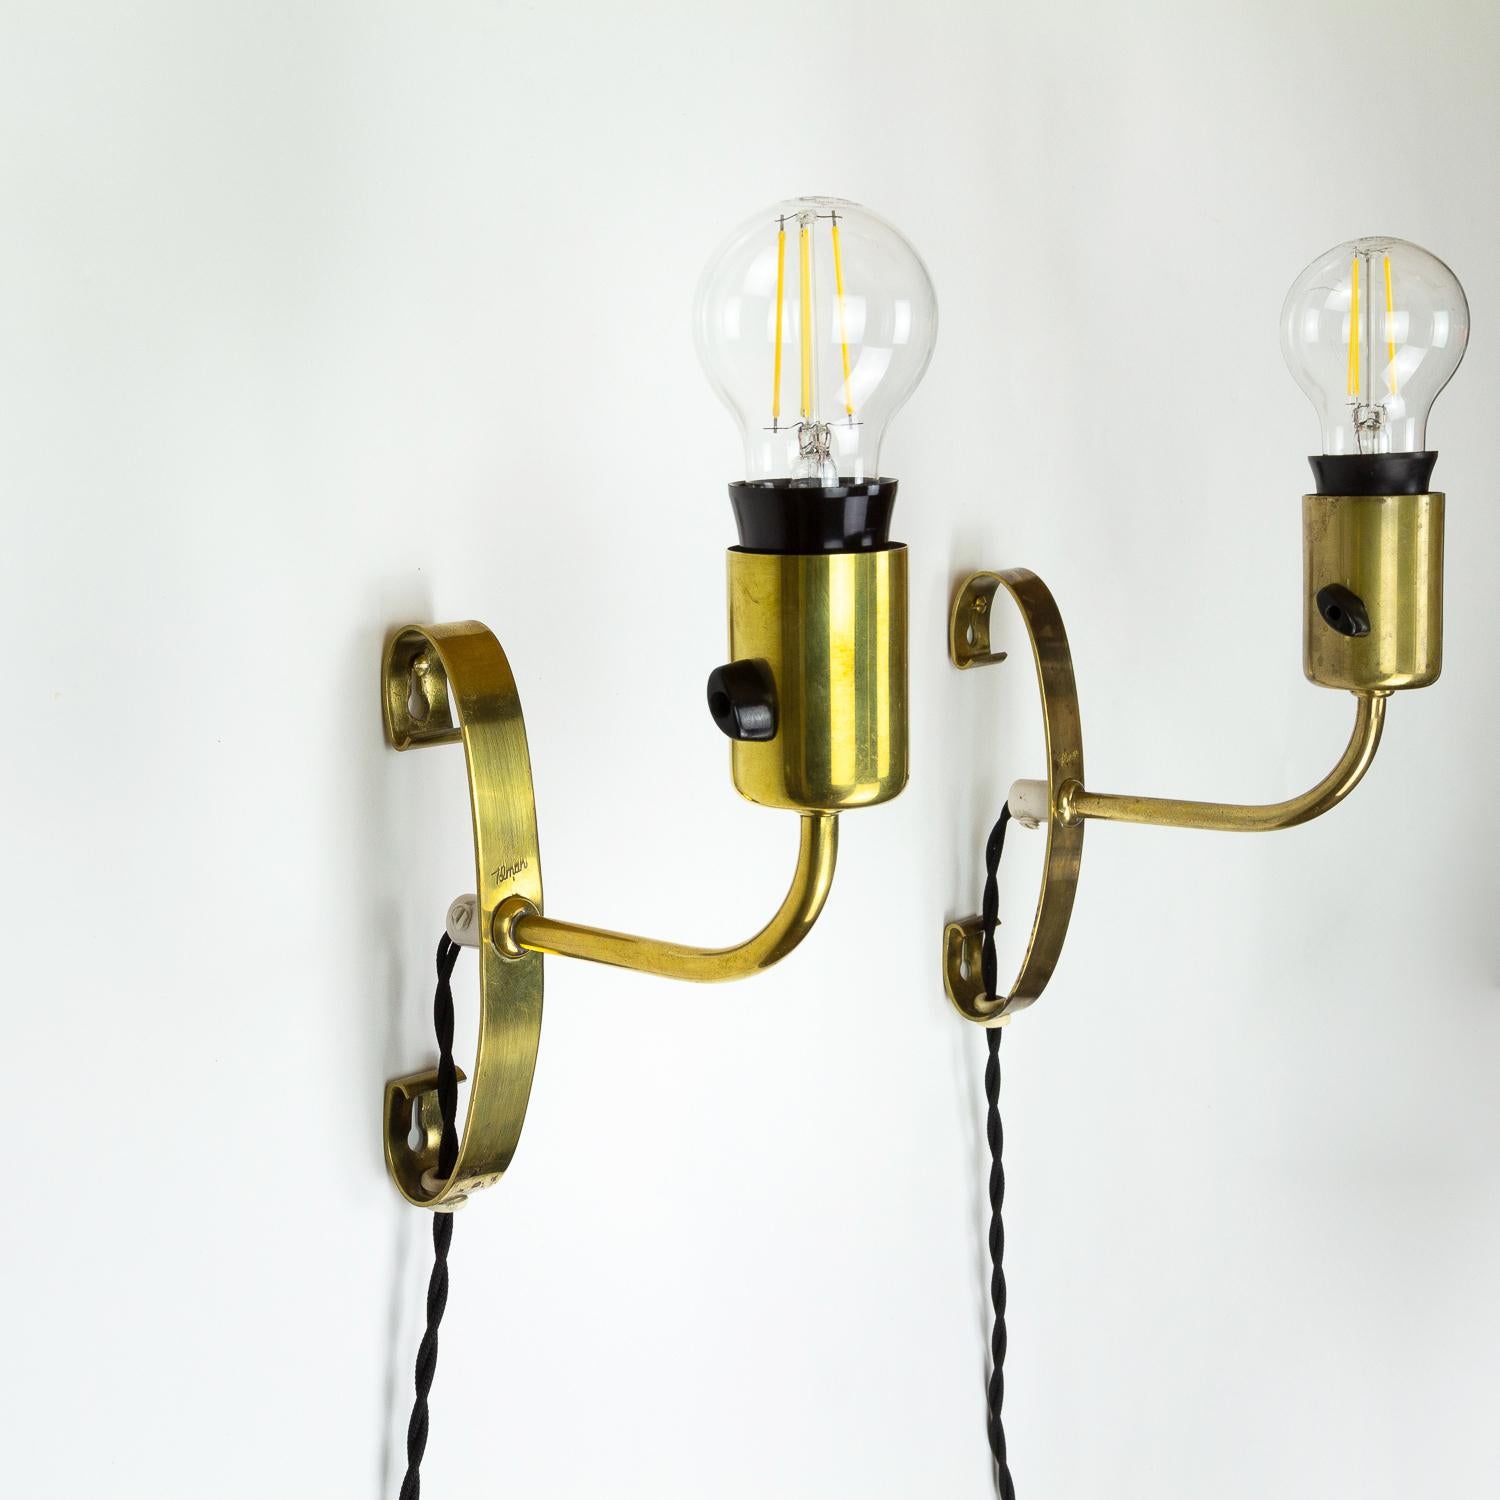 Pair of Midcentury Brass Wall Lights, Maria Lindemann, Idman Oy, Finland, 1950s For Sale 4